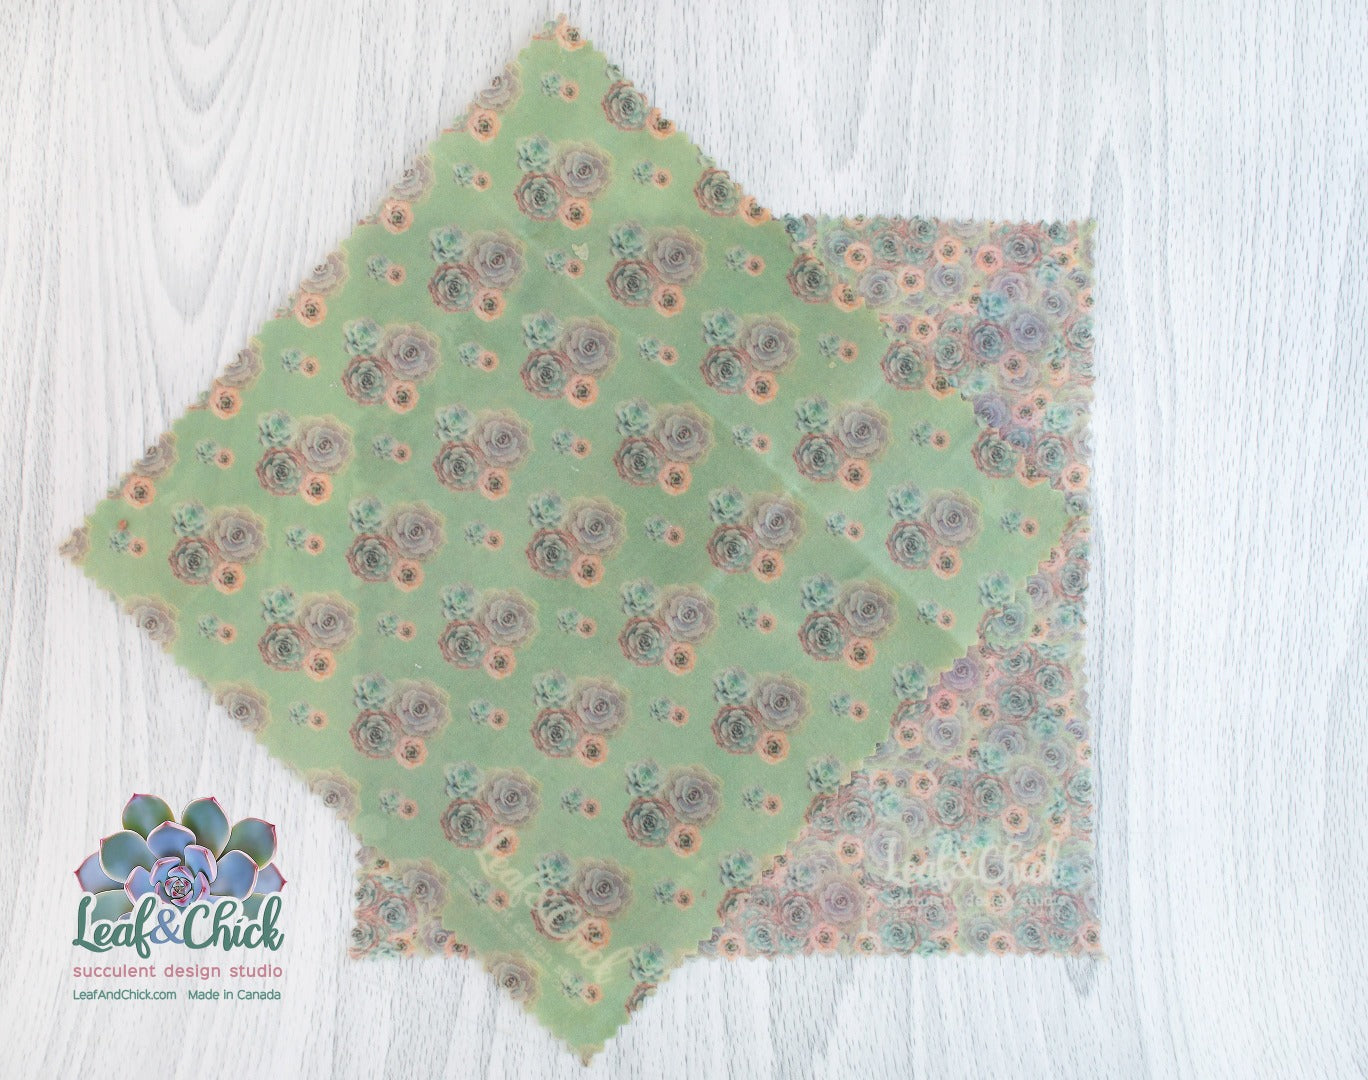 Leaf & Chick succulent fabric beeswax food wraps